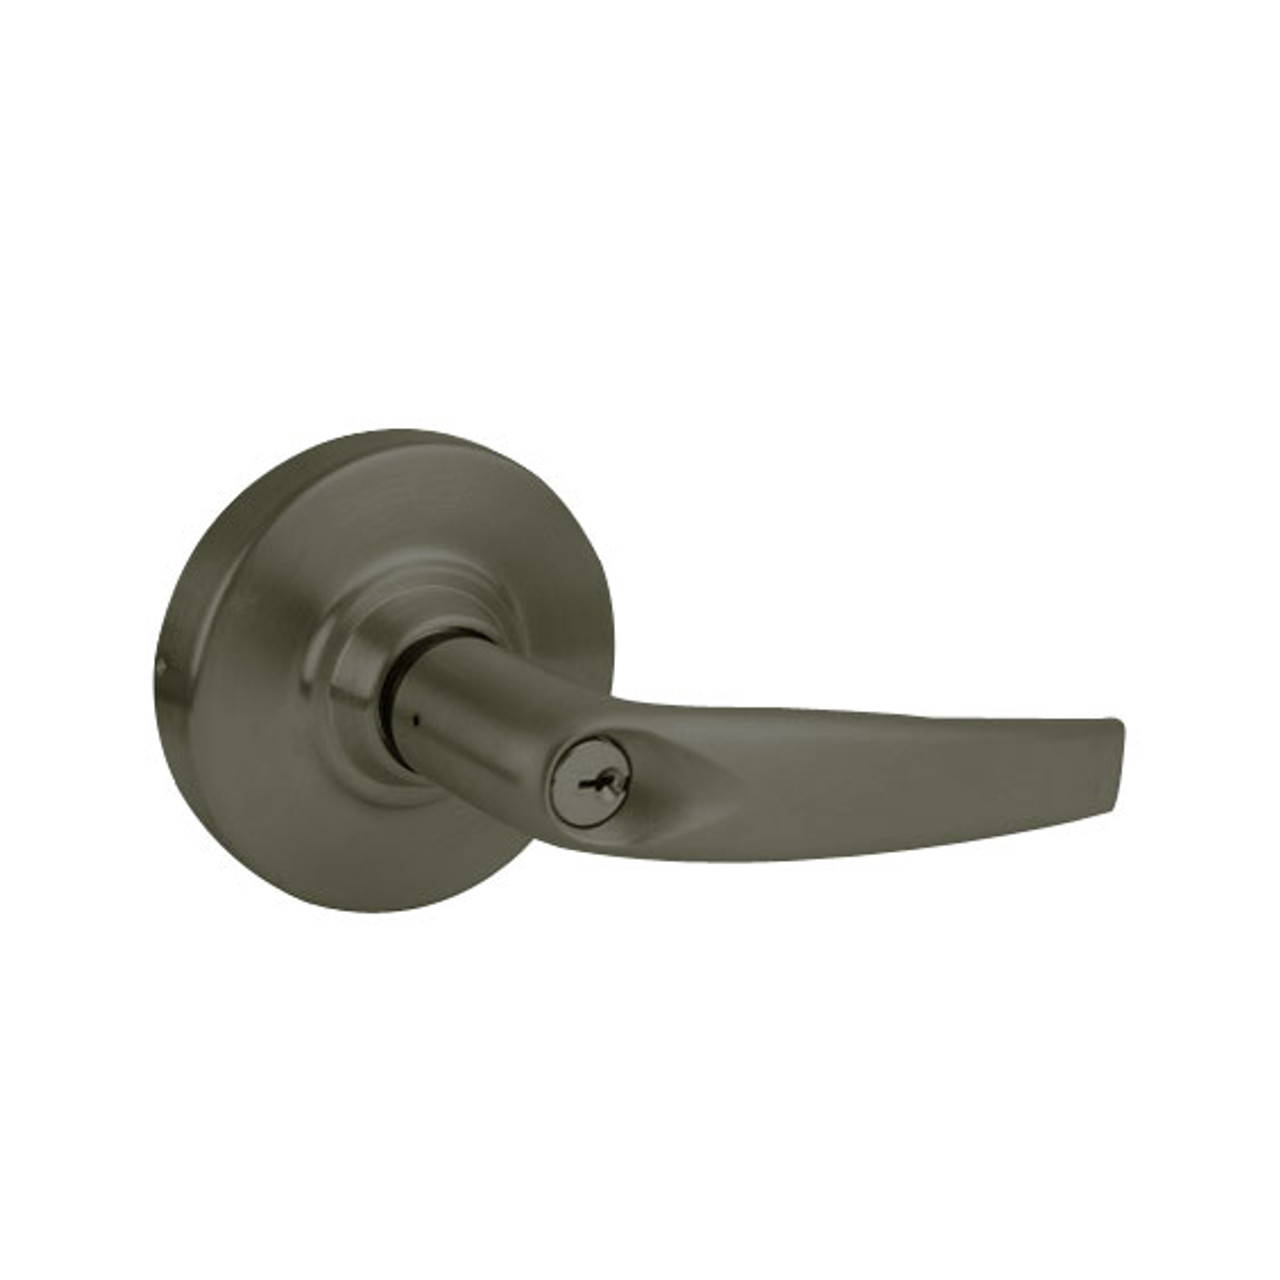 ND73PD-ATH-613 Schlage Athens Cylindrical Lock in Oil Rubbed Bronze